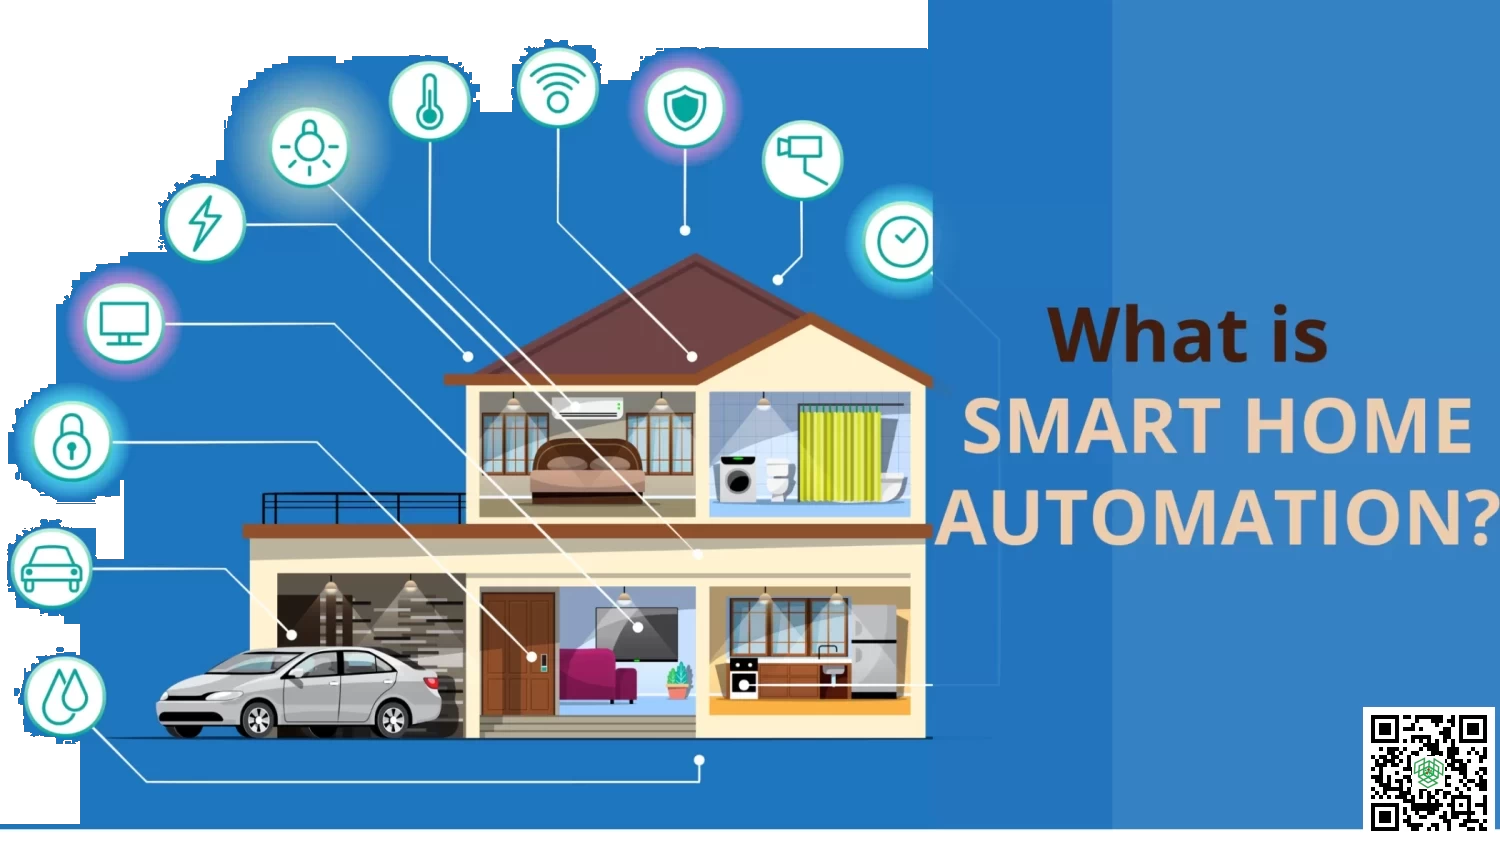 Smart home automation solutions